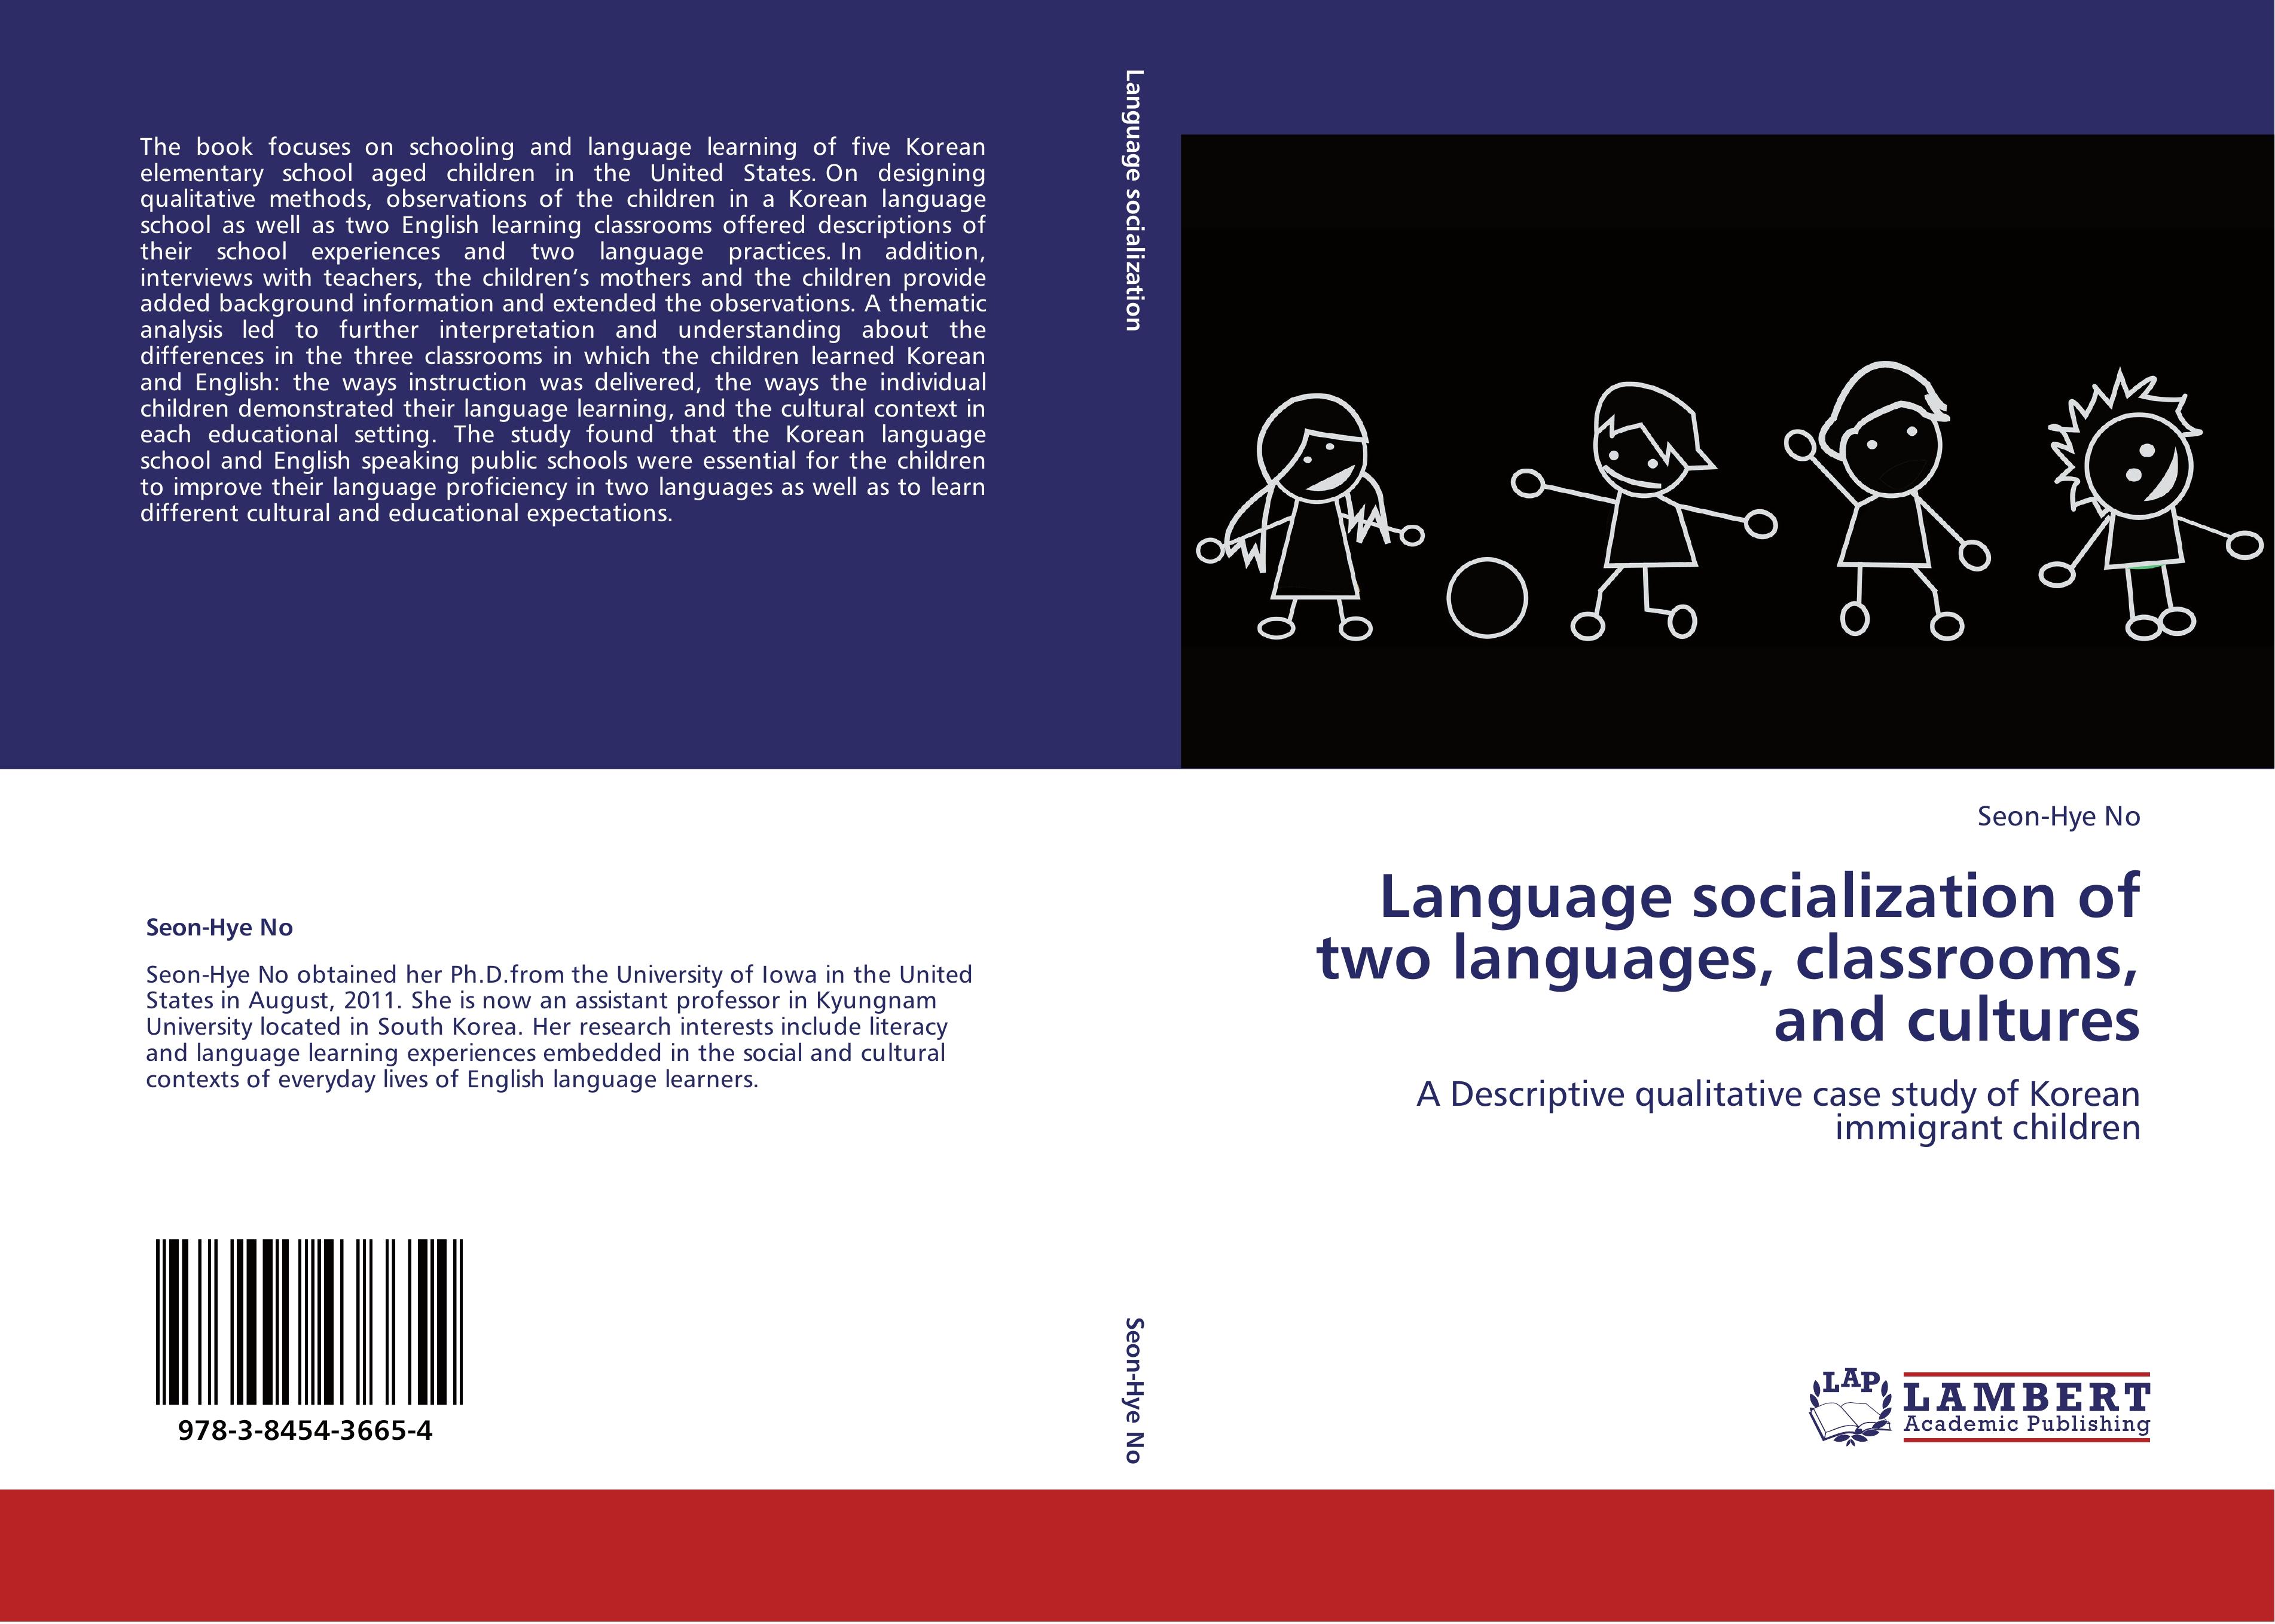 Language socialization of two languages, classrooms, and cultures - Seon-Hye No